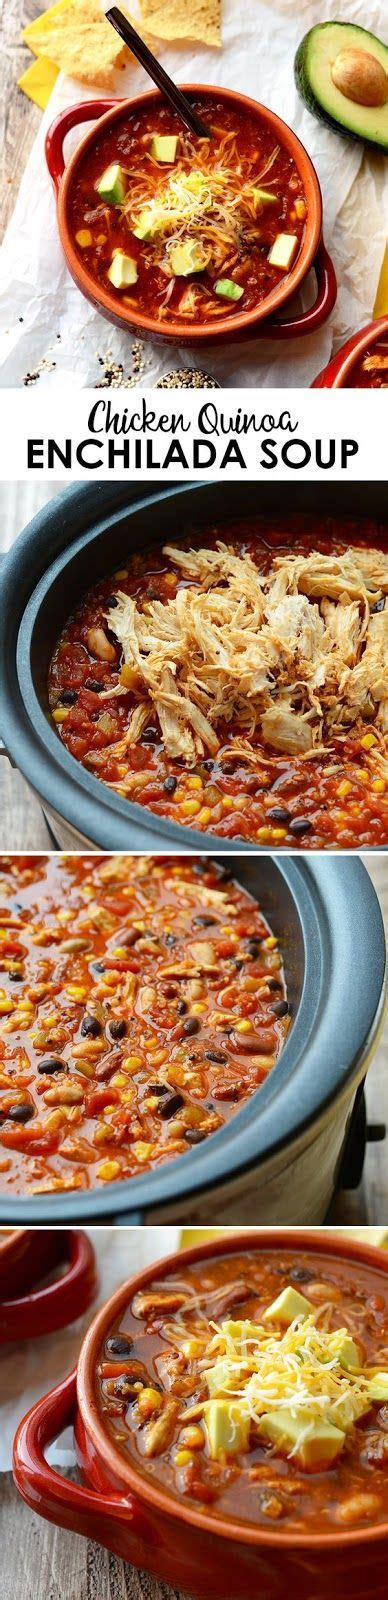 Not only do they help cook for us while we are busy at work or running errands, they also engulf the home with a wonderful aroma. Crock-Pot Chicken Enchilada Soup | Food recipes, Food ...